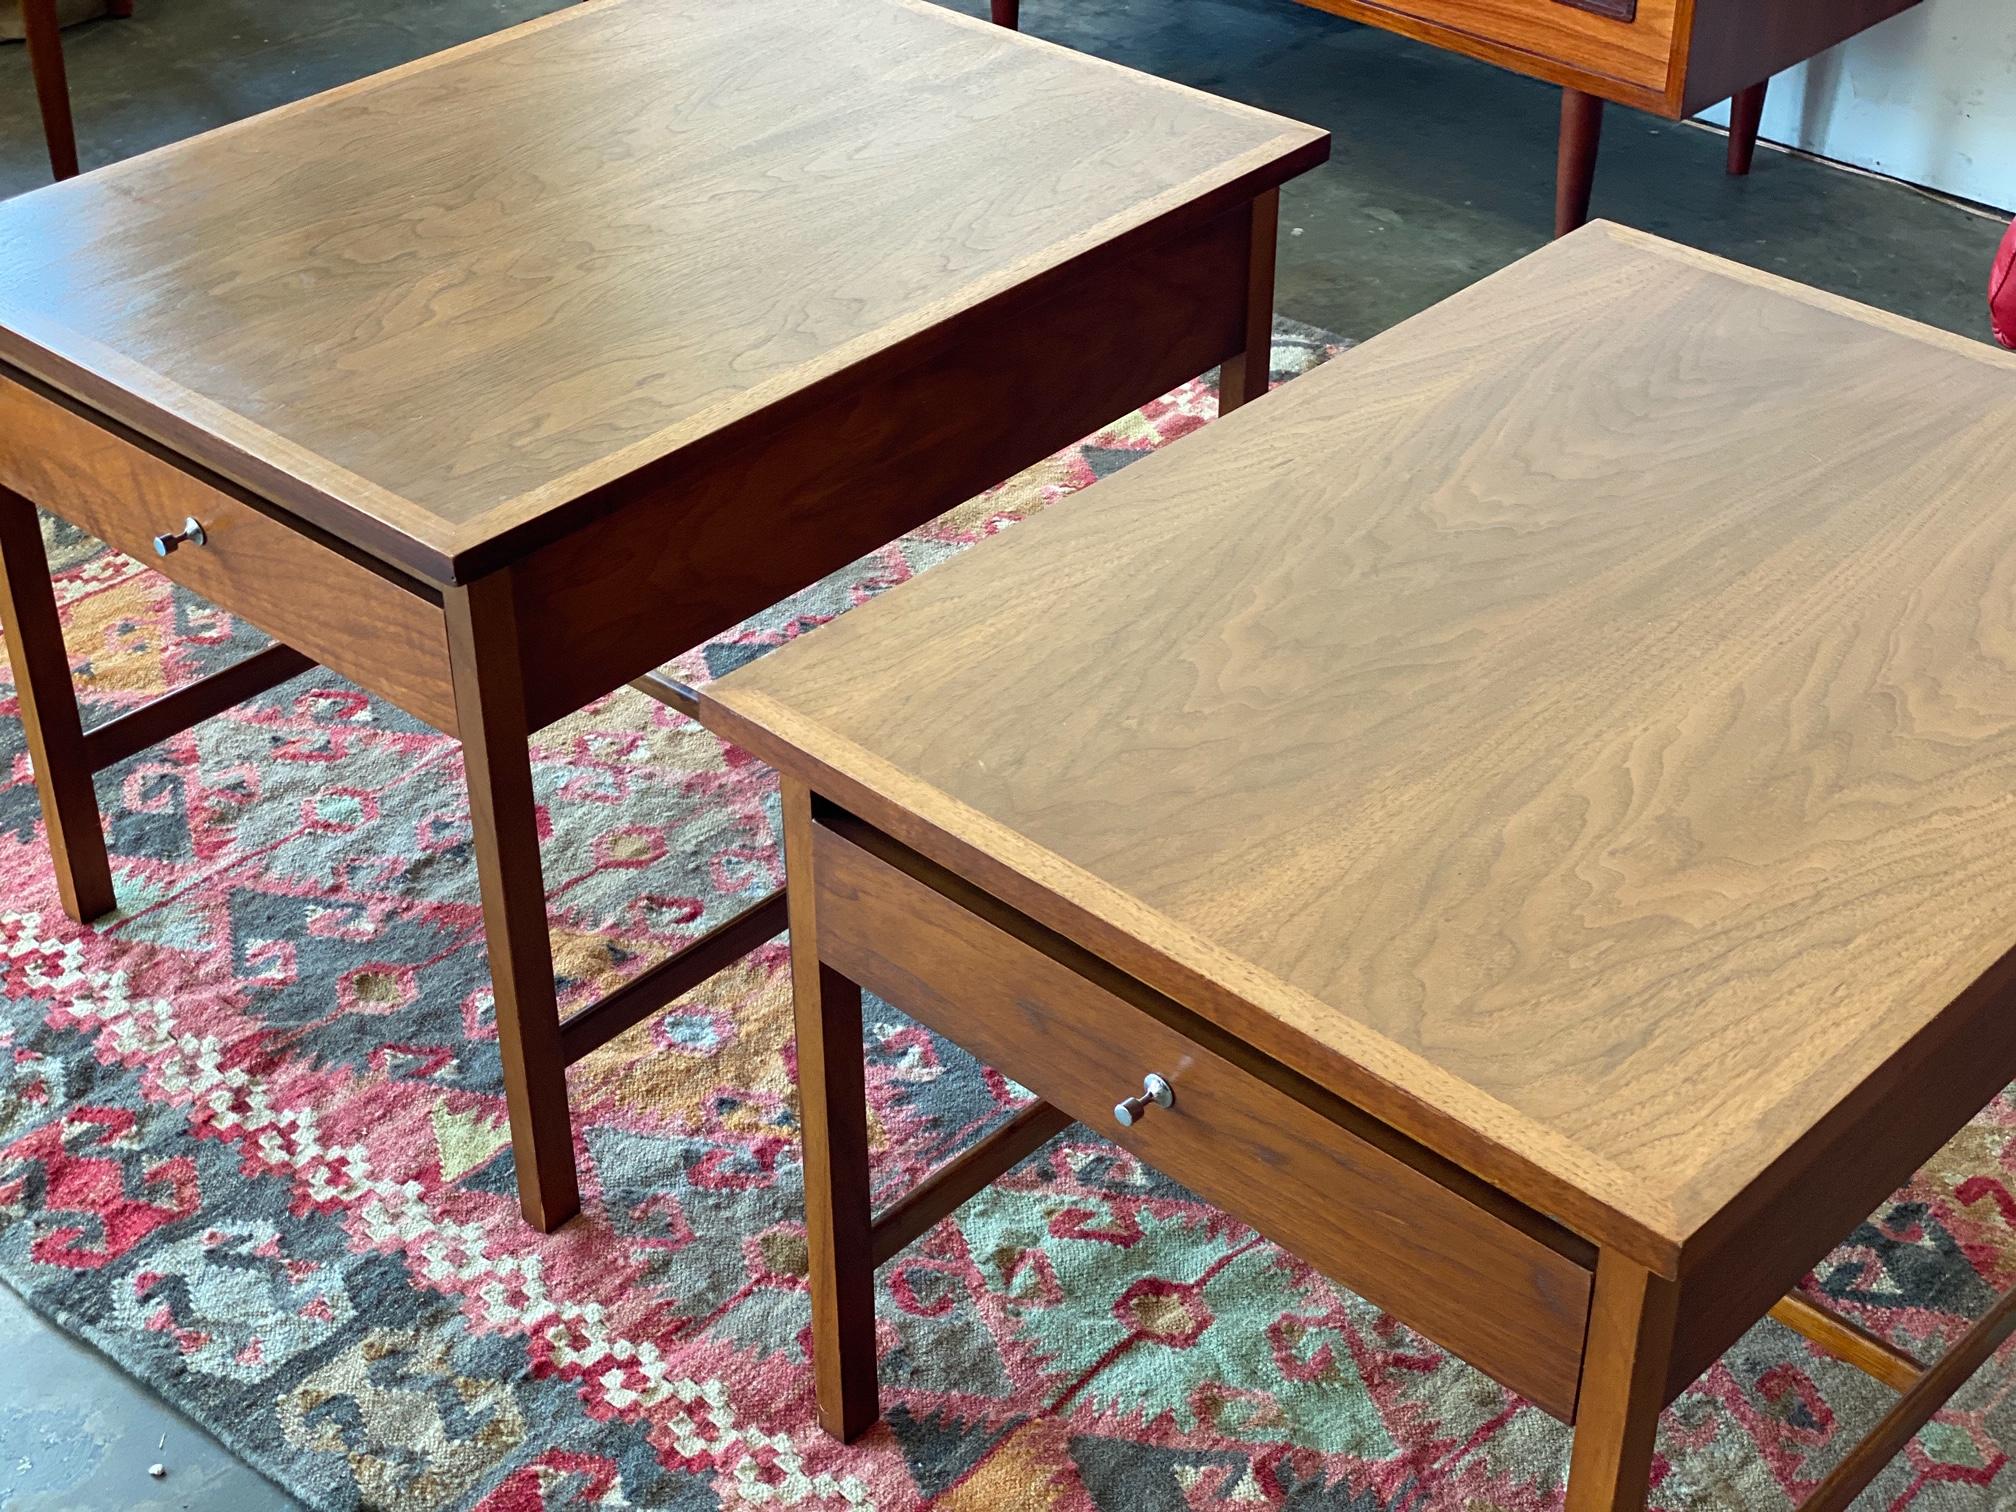 American Vintage 1960s Pair of 'Delineator' Walnut Side Tables by Paul McCobb for Lane